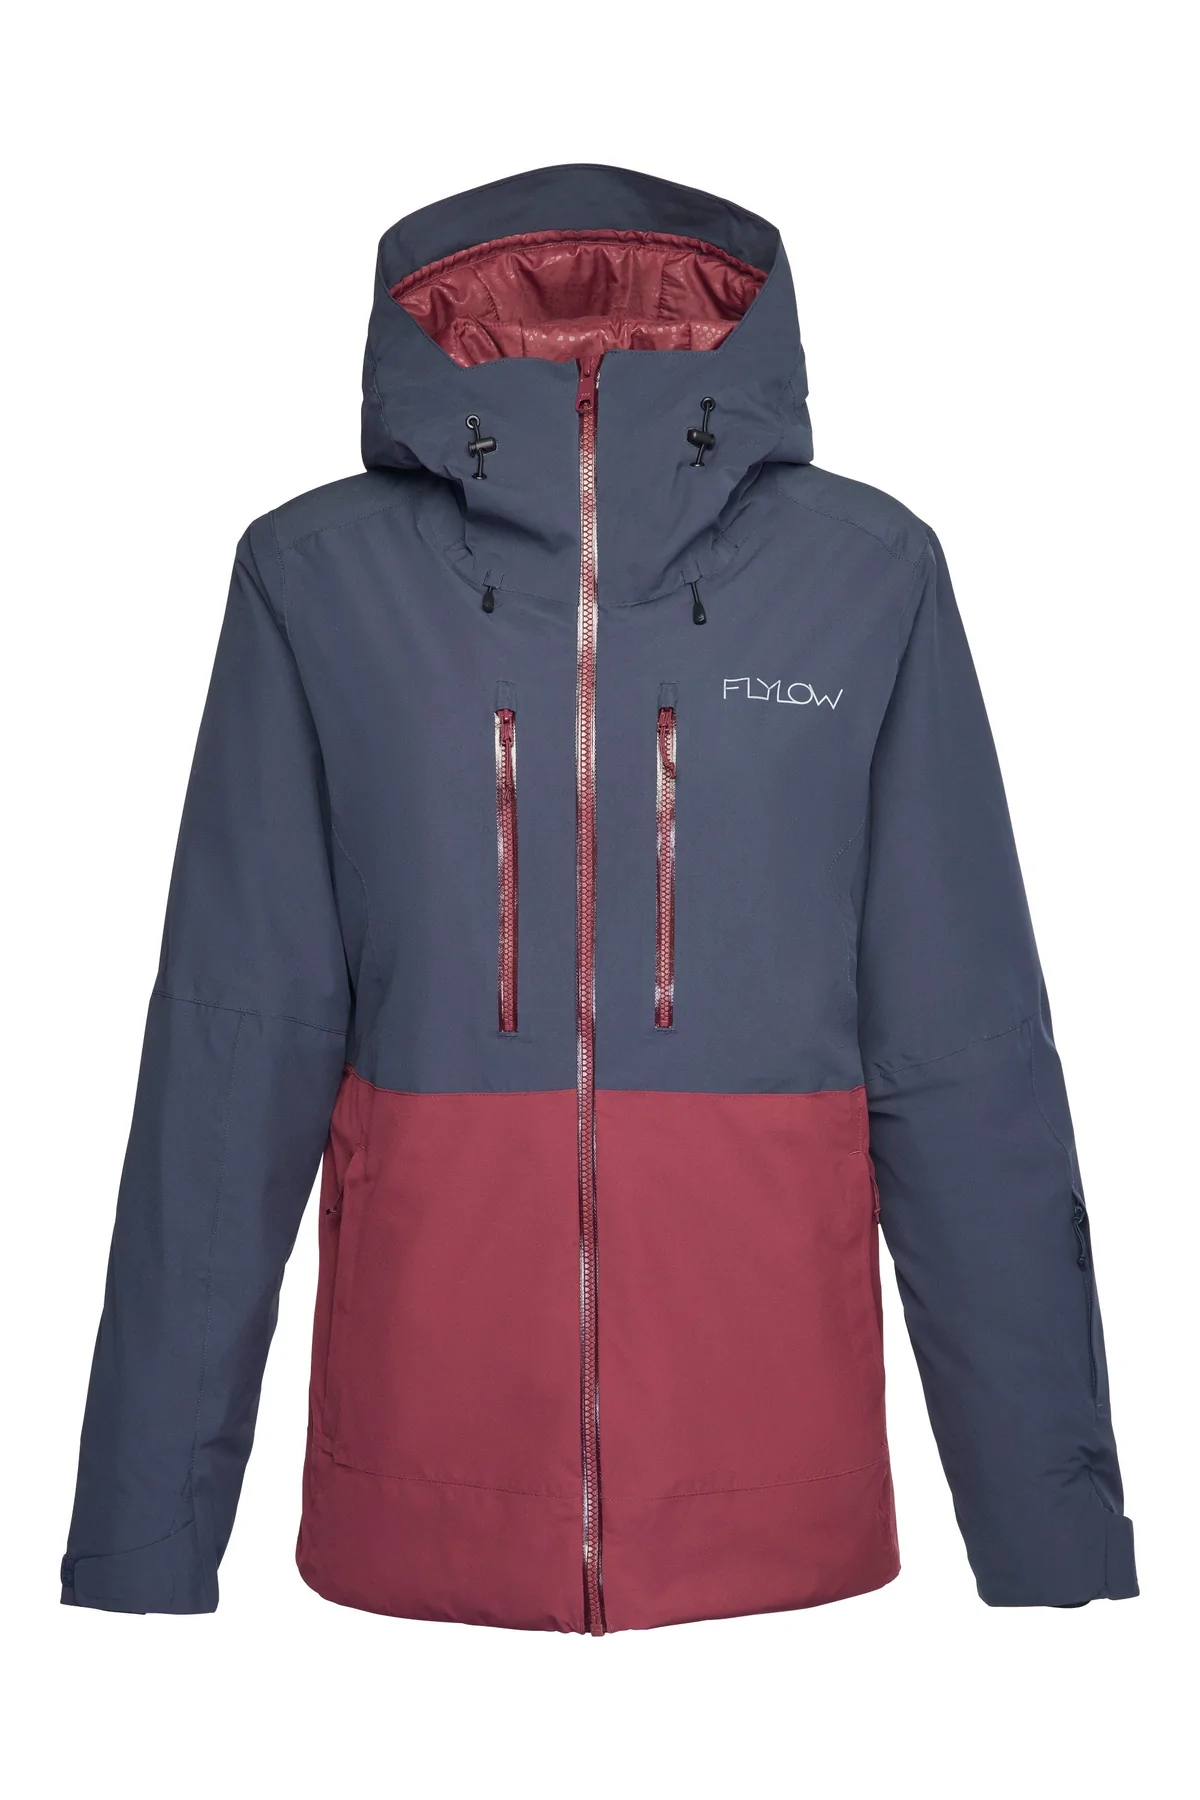 Kara Williard reviews the Flylow Avery Jacket for BLISTER.